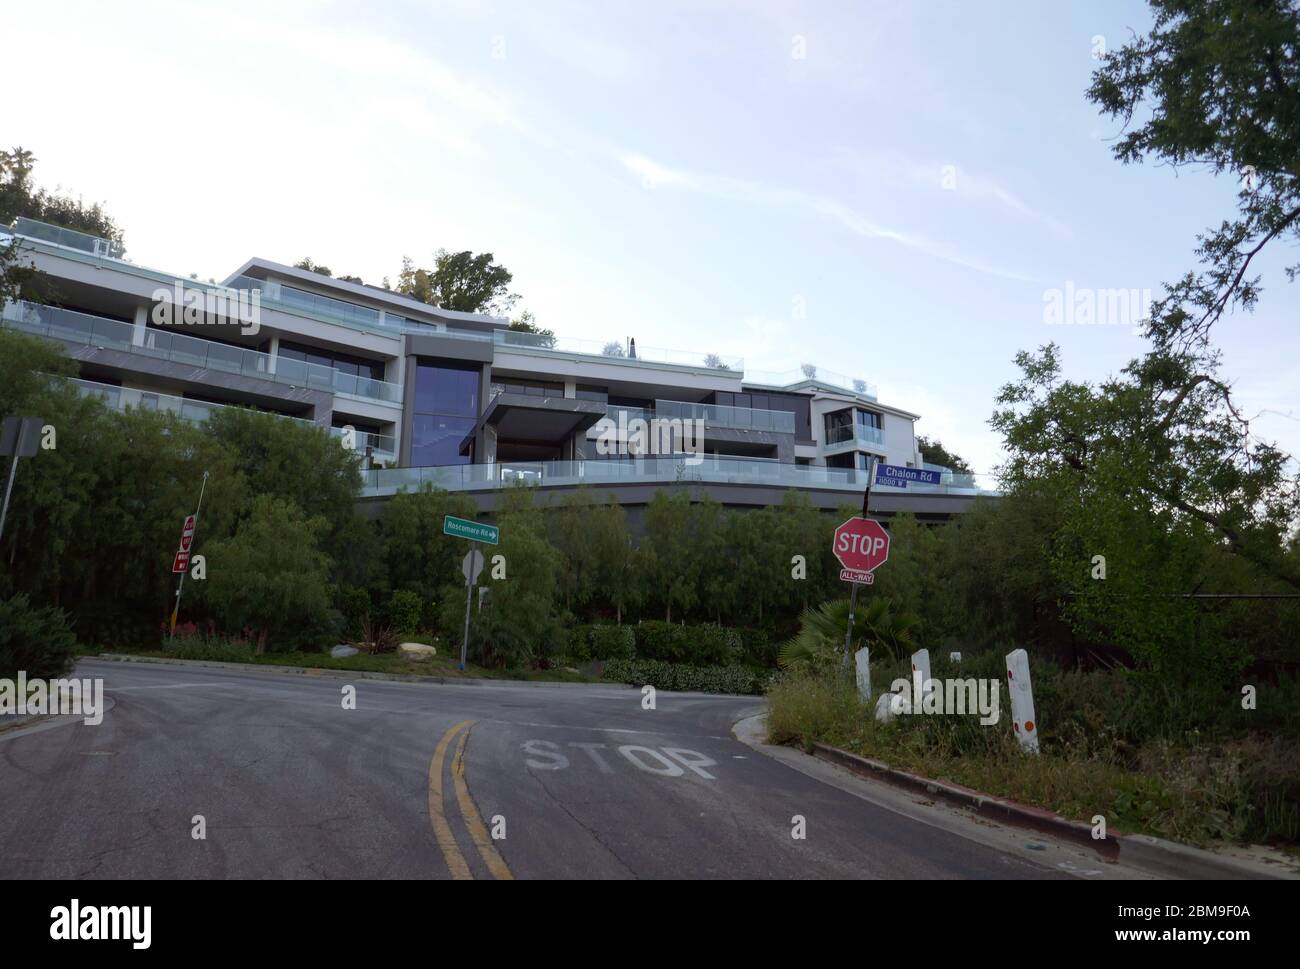 Bel Air, California, USA 7th May 2020 A general view of atmosphere of Home for sale for $58 Million dollars at 10979 Chalon Drive on May 7, 2020 in Bel Air, Californa, USA. Photo by Barry King/Alamy Stock Photo Stock Photo